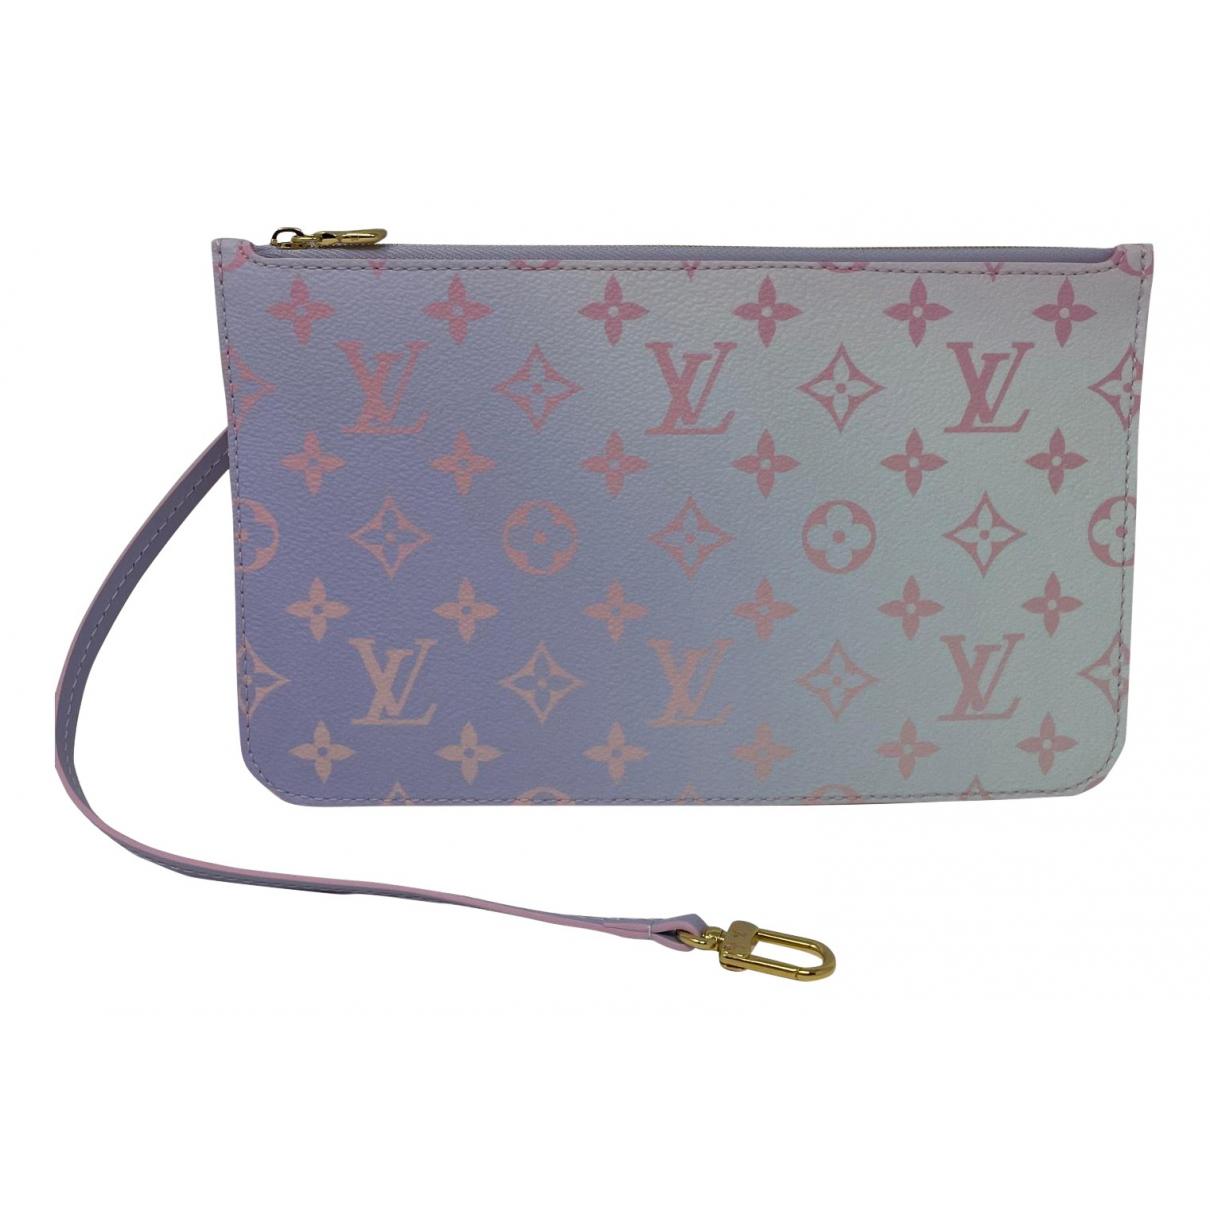 Louis Vuitton - Authenticated Key Pouch Clutch Bag - Cloth Pink for Women, Never Worn